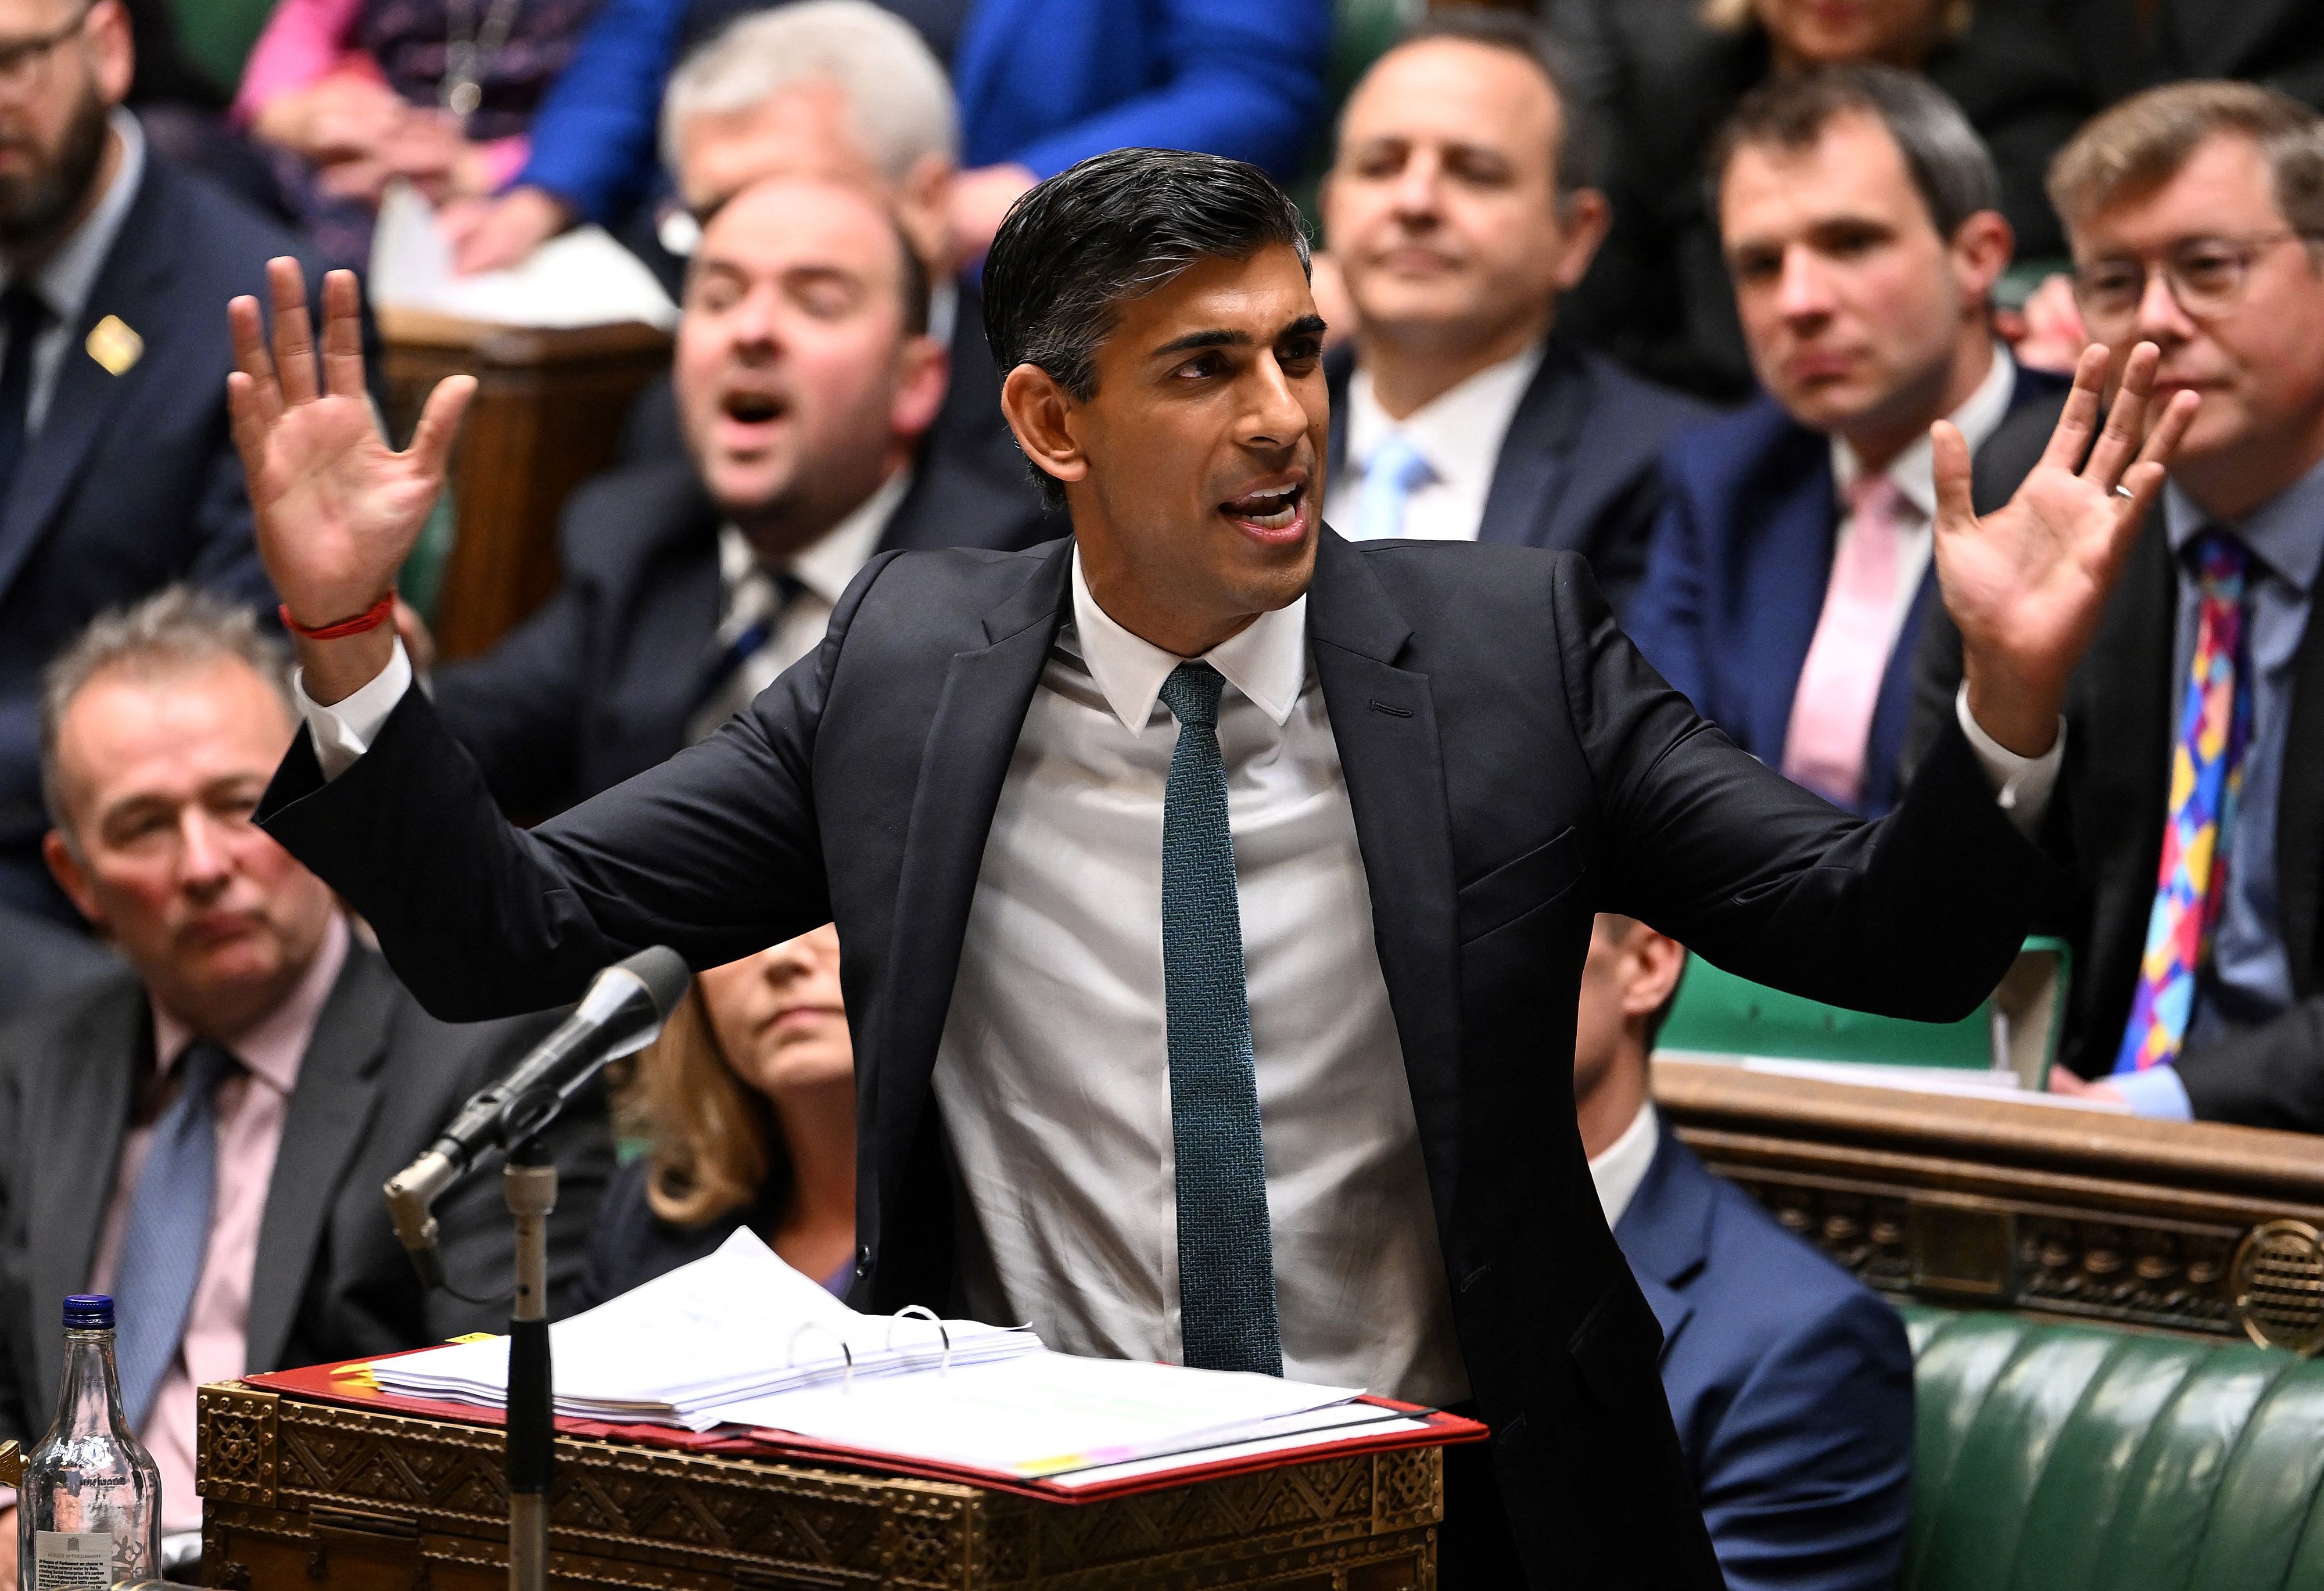 We urge Rishi Sunak not to backtrack on ambitious pledges to boost defence spending